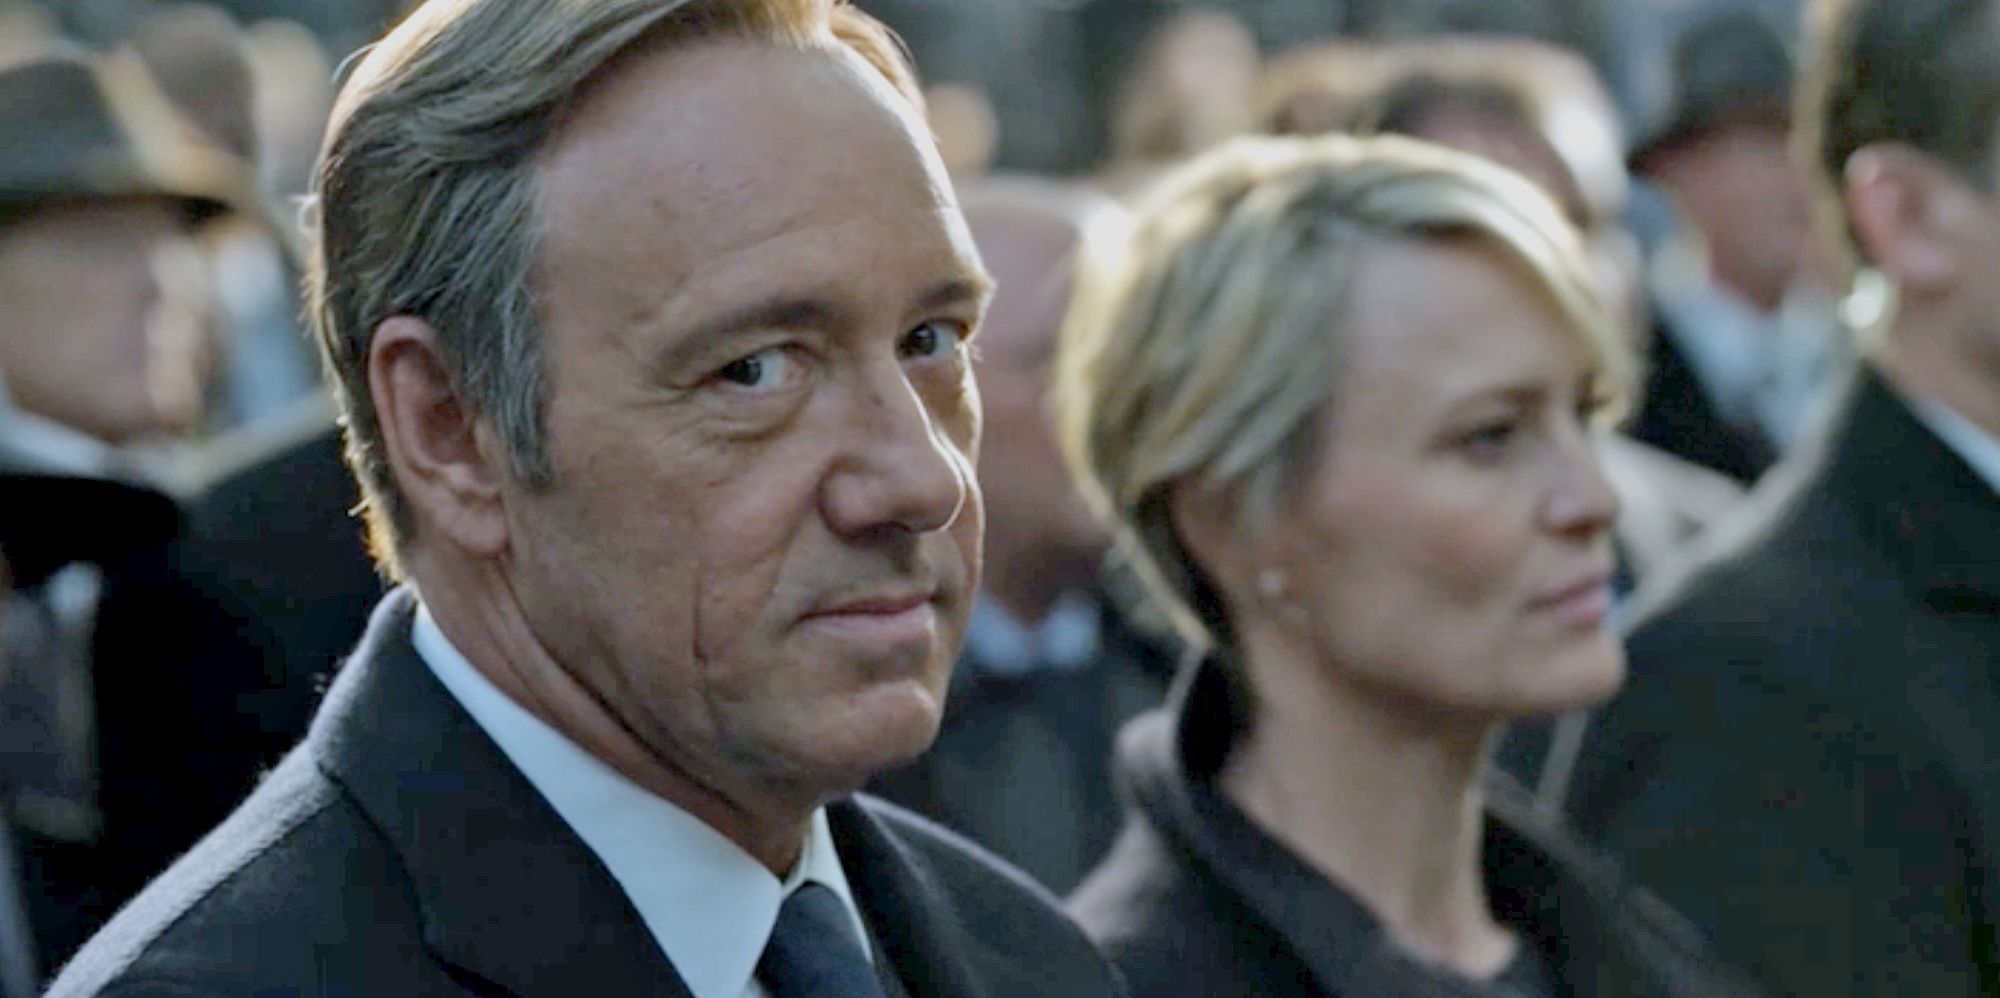 What Will Happen in House of Cards Season 6